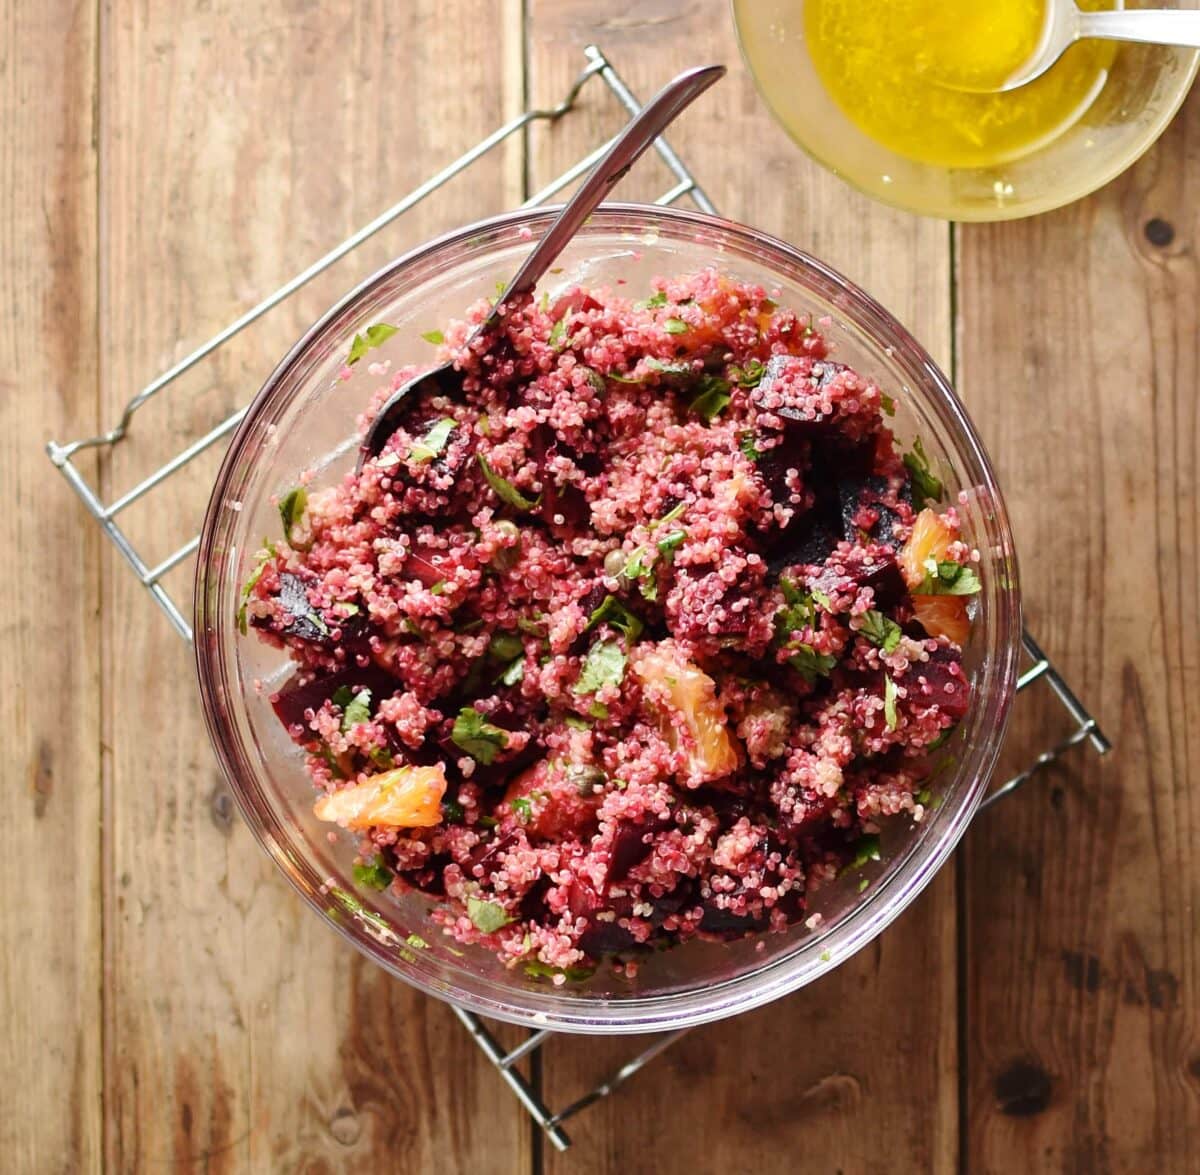 Top down view of quinoa beetroot salad with spoon inside large bowl, with dressing in small dish in top left corner.